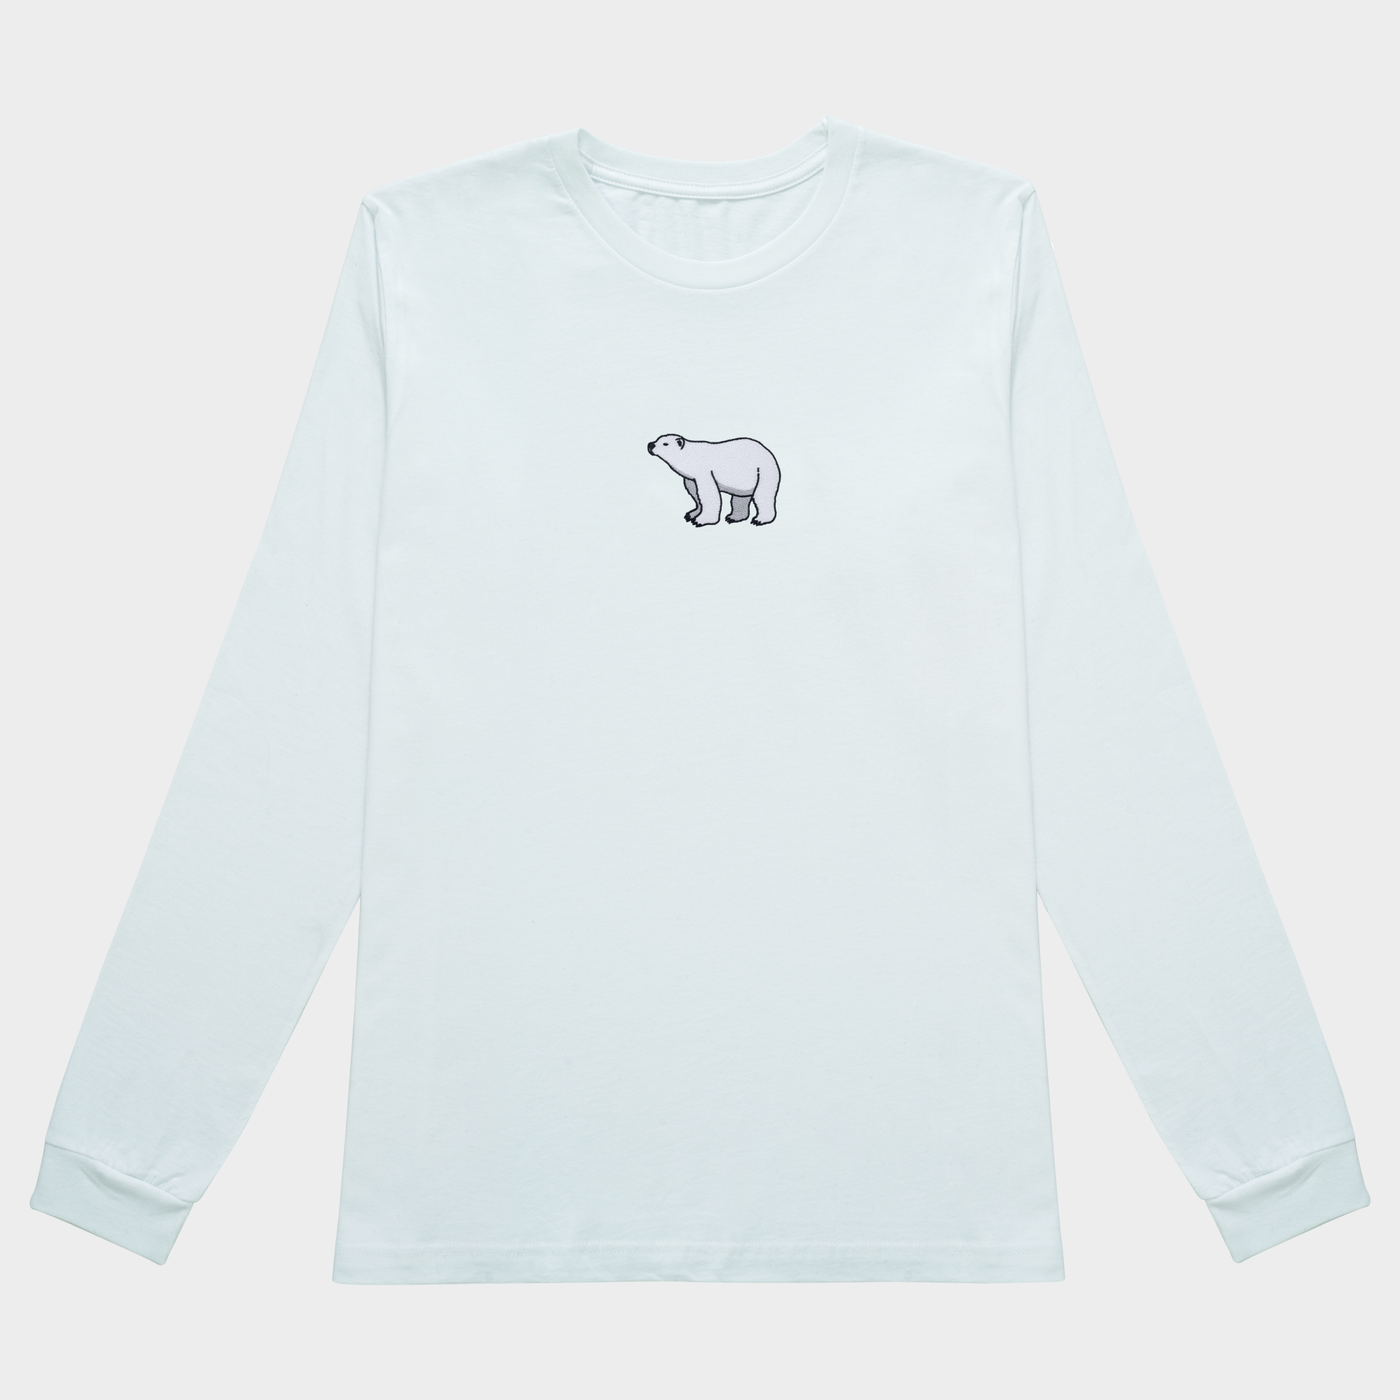 Bobby's Planet Women's Embroidered Polar Bear Long Sleeve Shirt from Arctic Polar Animals Collection in White Color#color_white